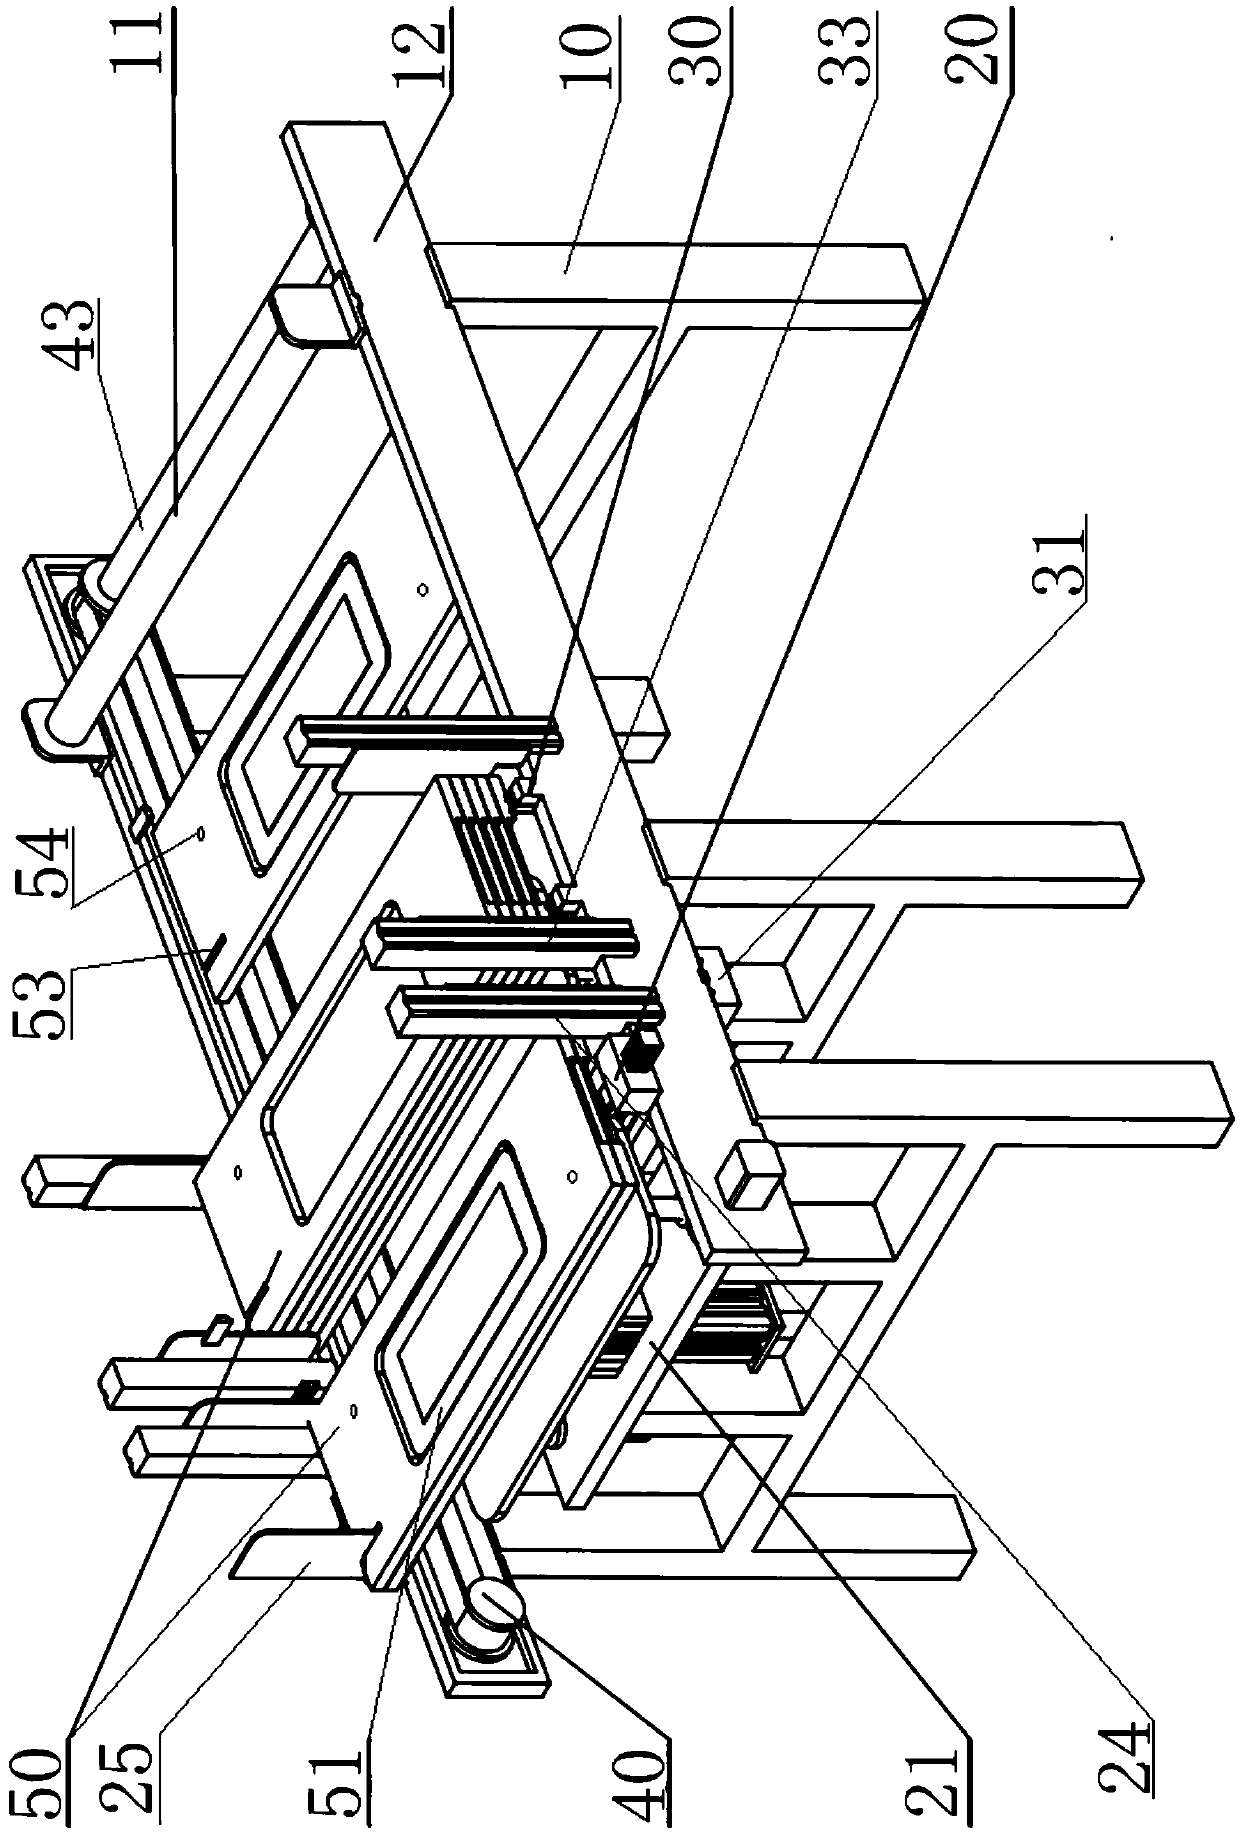 Flexible material feeding and discharging device